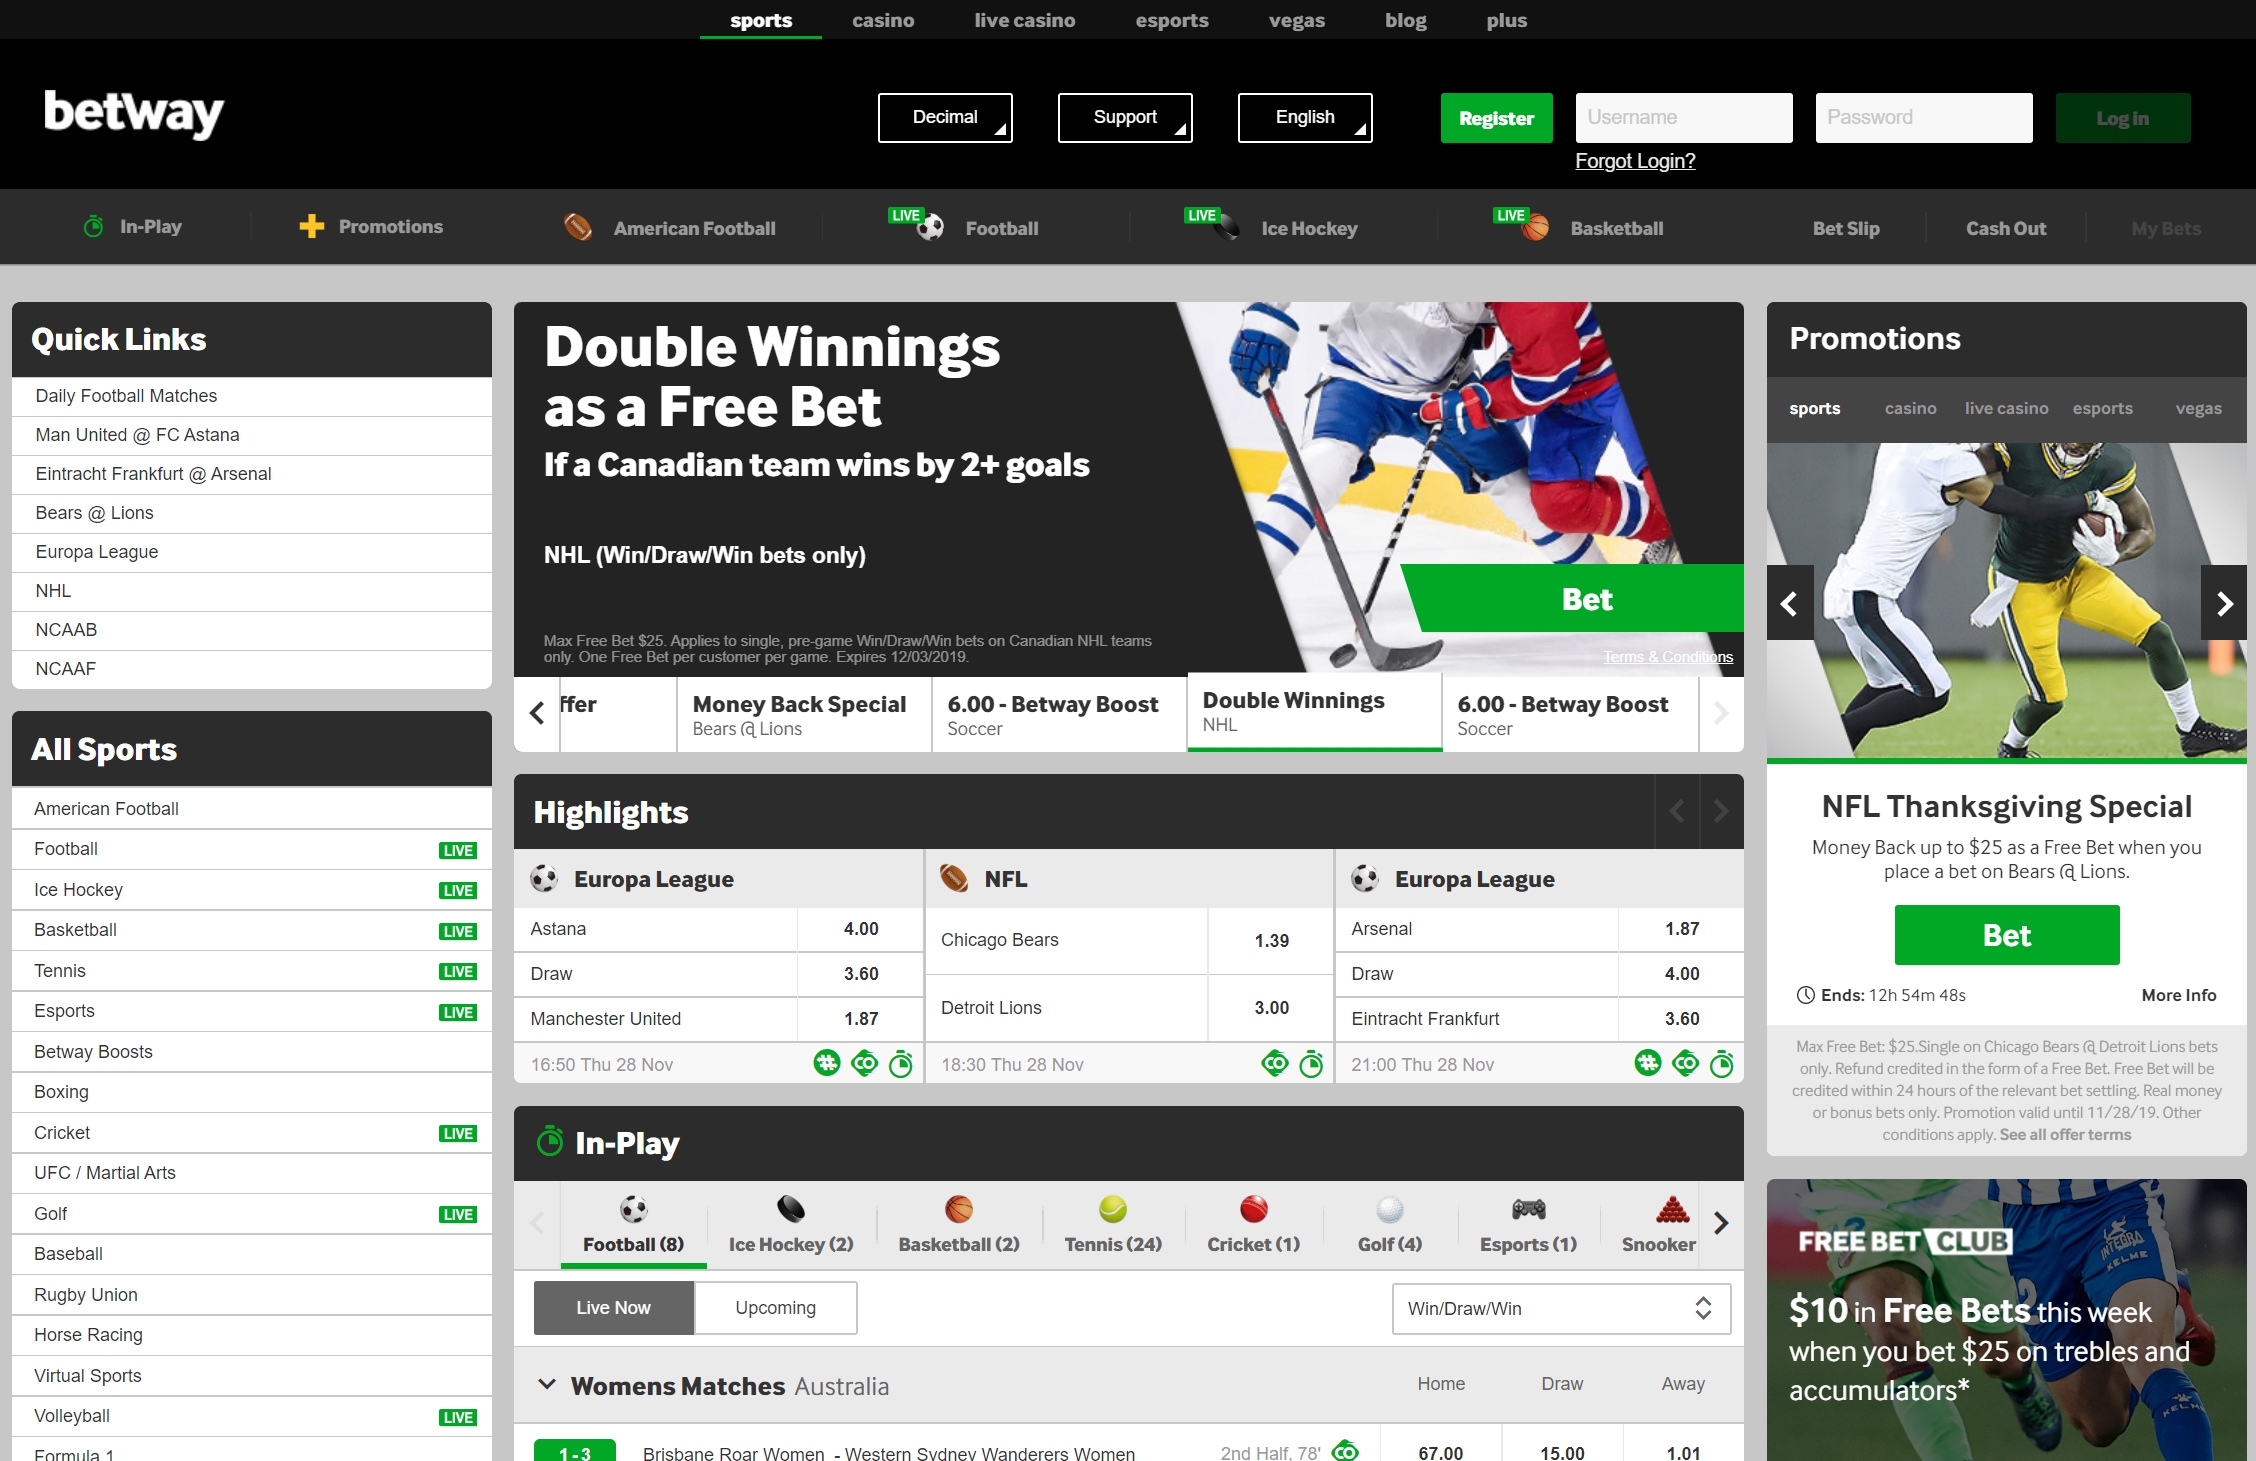 sports bet online canada